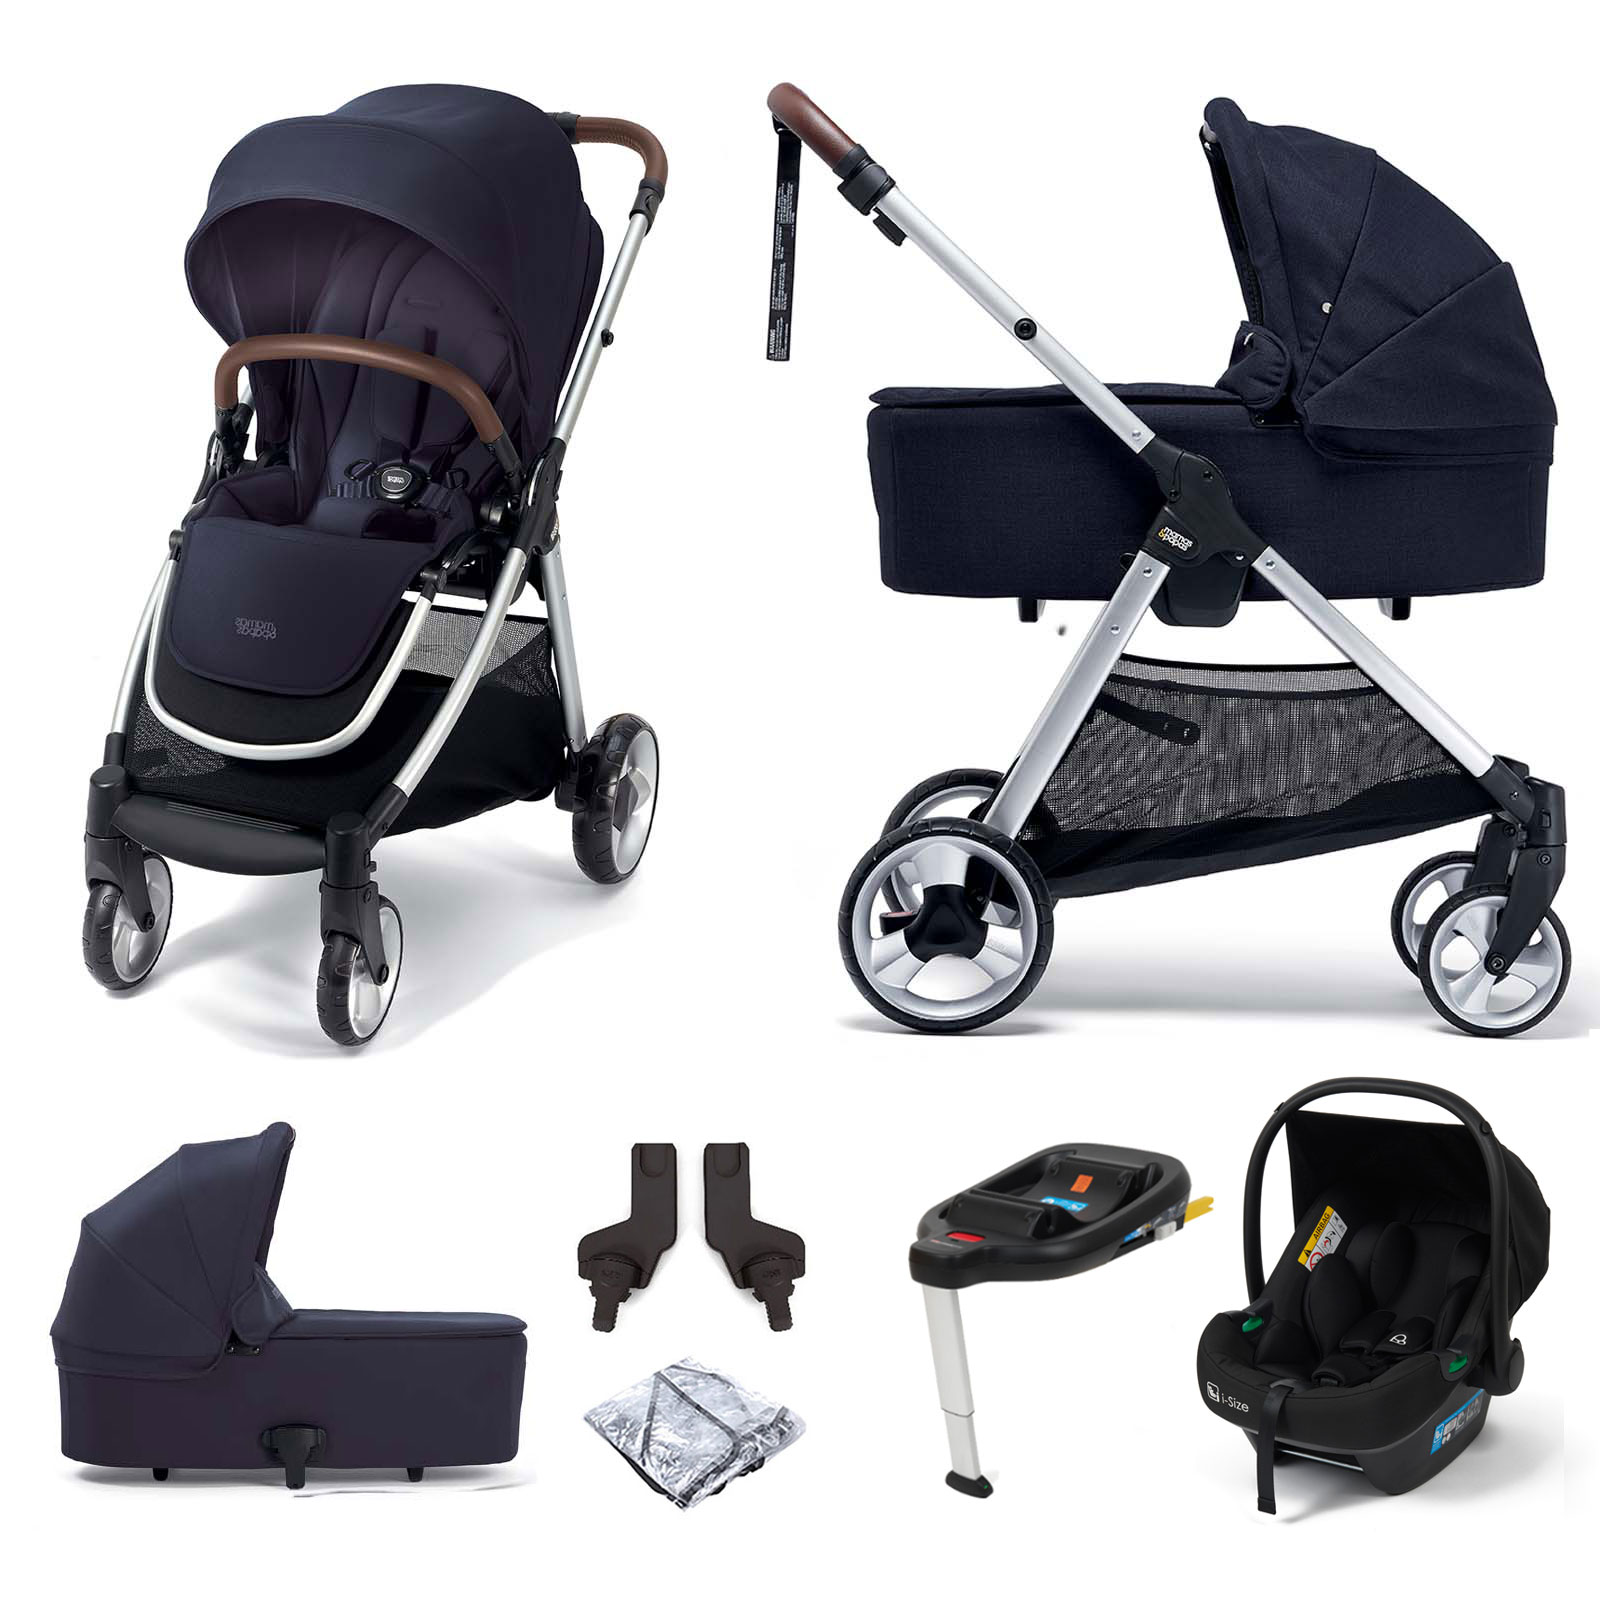 Mamas & Papas Flip XT2 (Safe Fit Car Seat & ISOFIX Base) Travel System with Carrycot - Navy